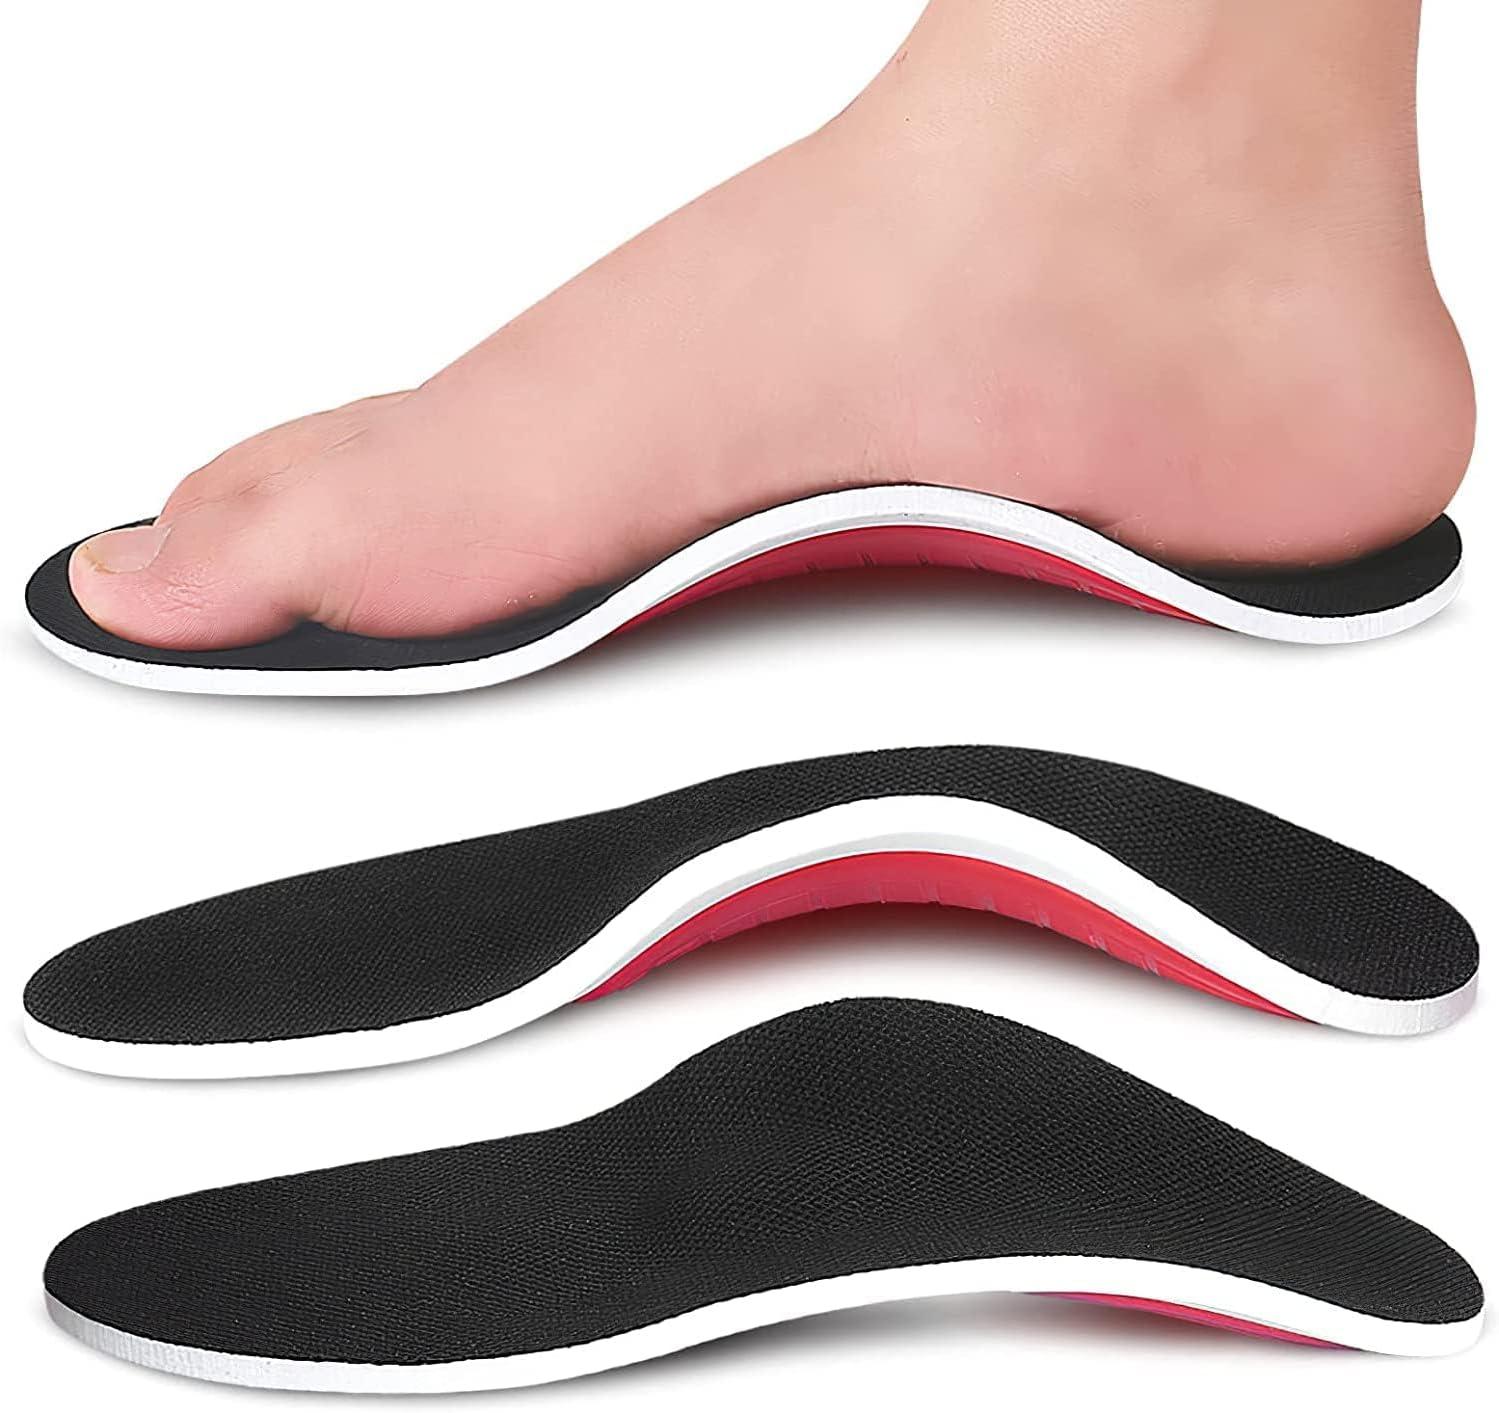 Arch Support Insoles for Women & Men, Orthotic Shoe Inserts for